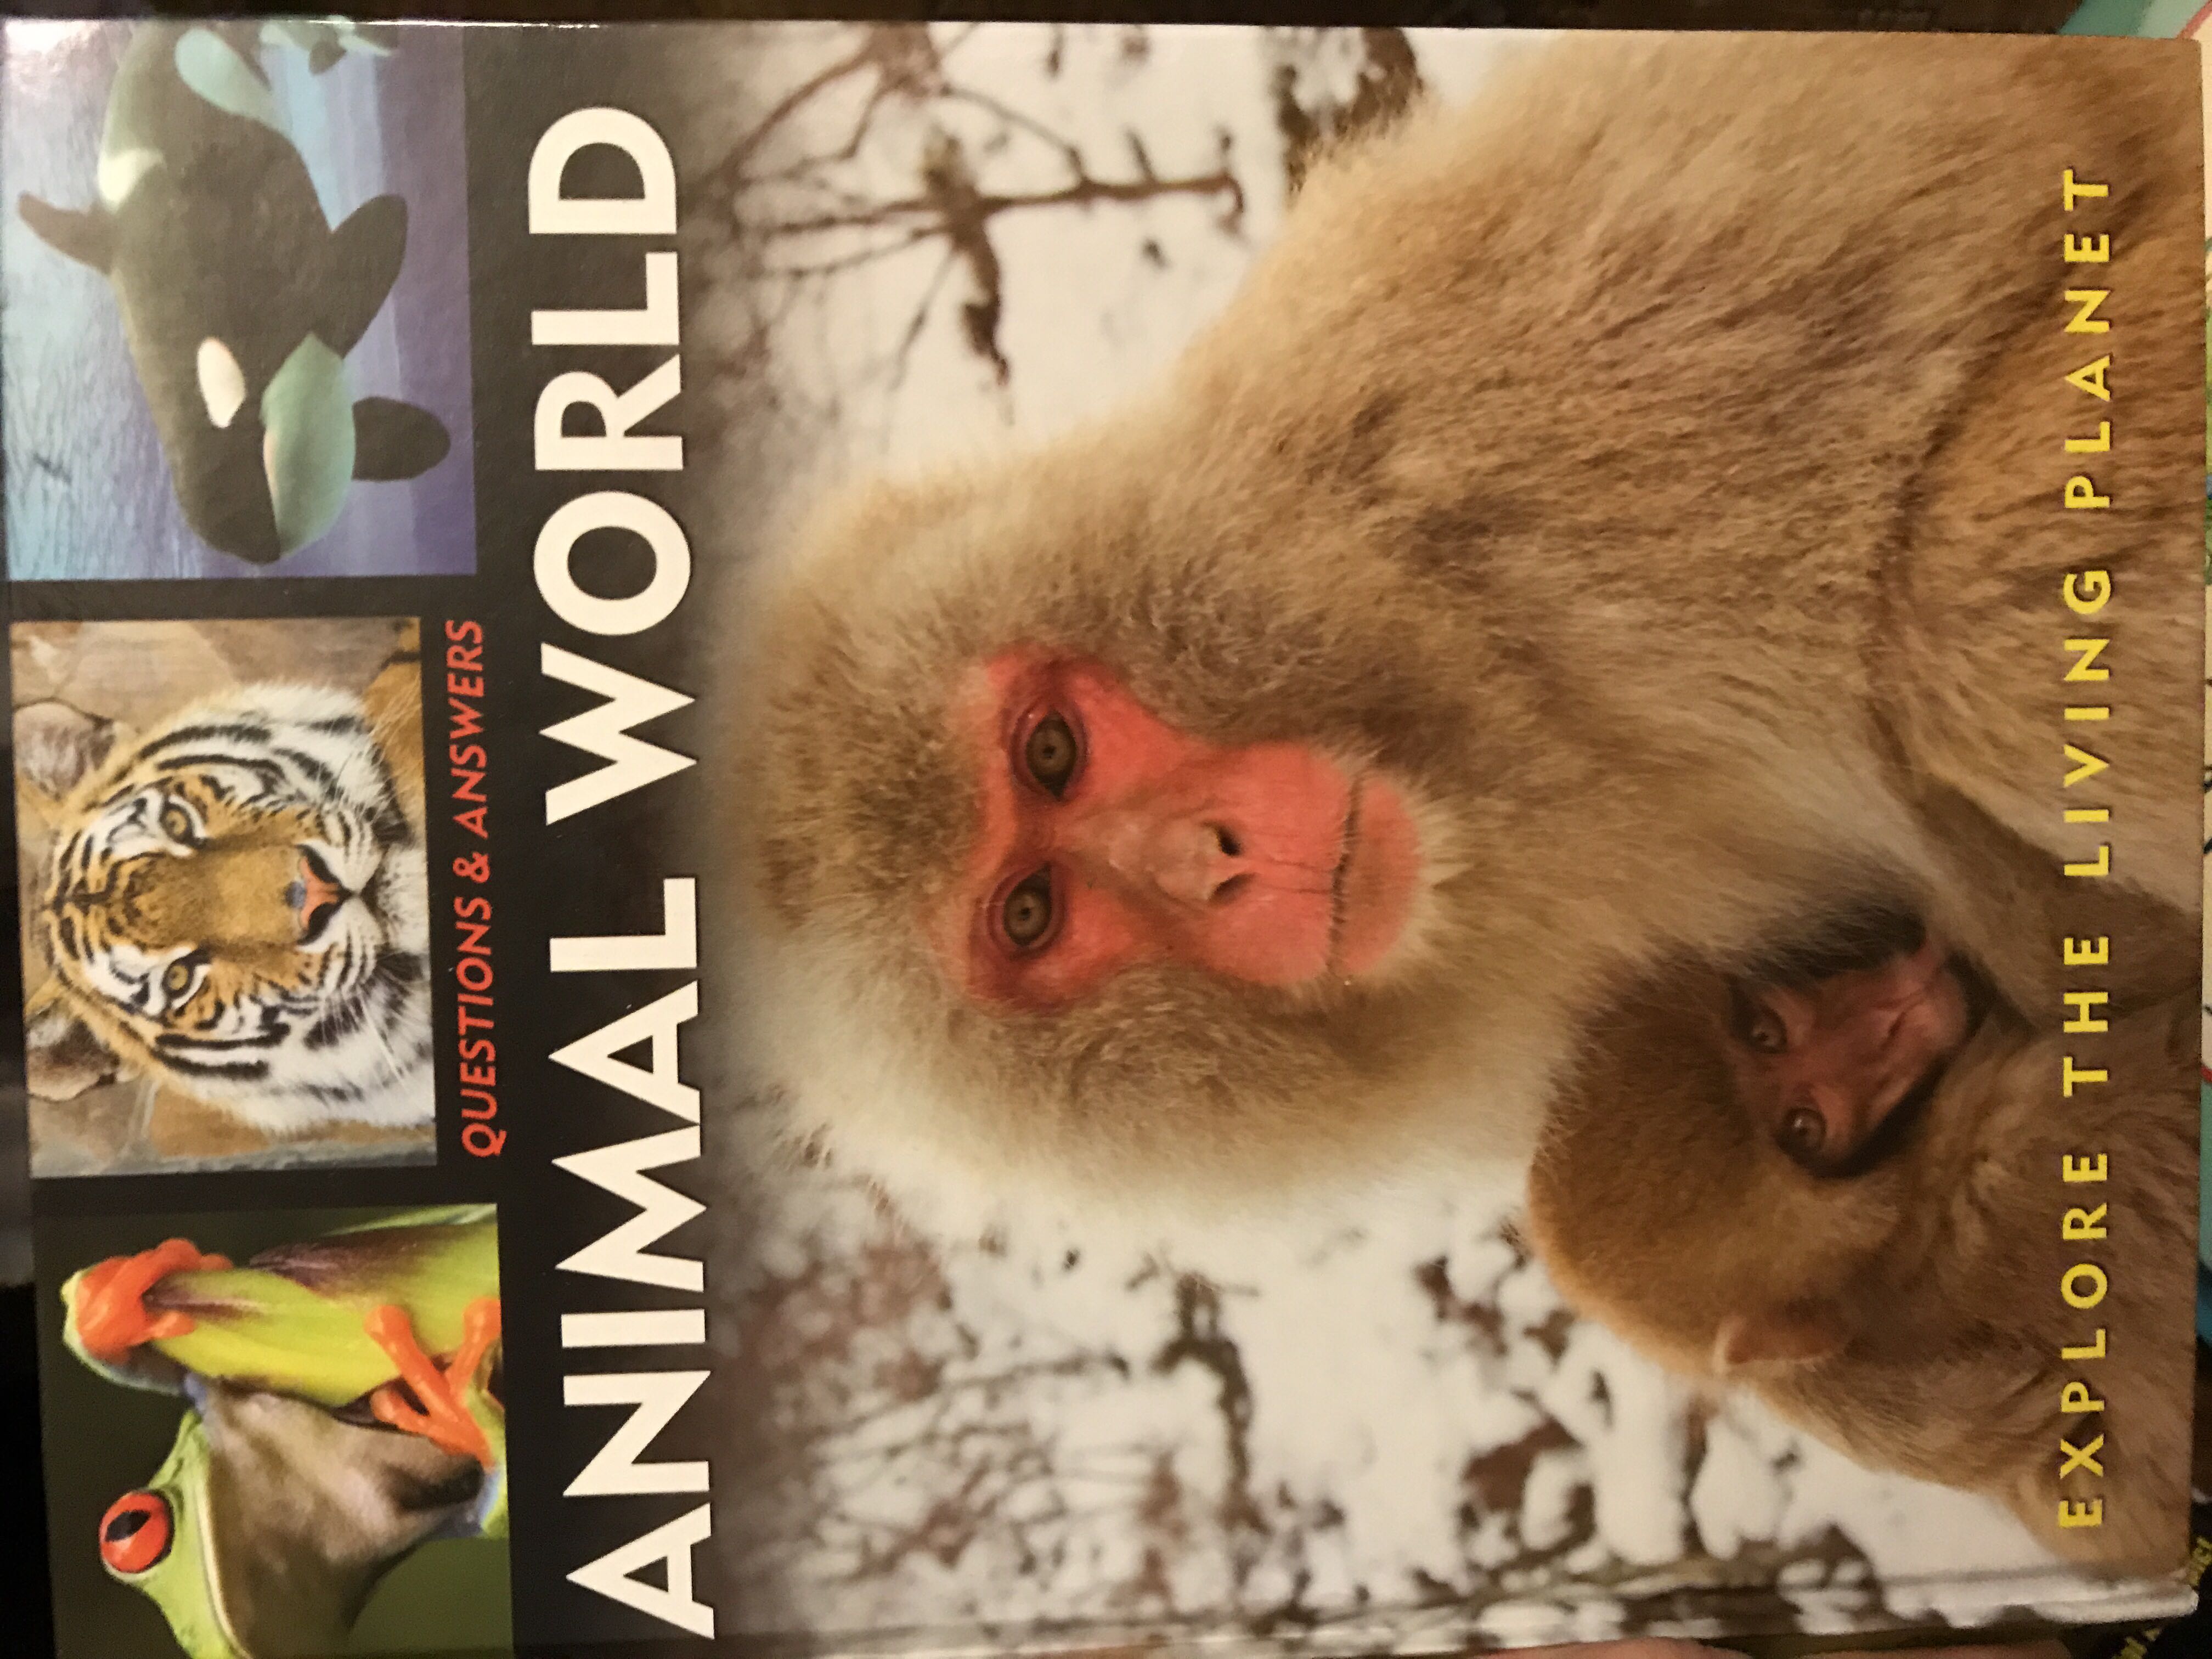 Animal World Questions & Answers - Author Unknown (Capella - Hardcover) book collectible [Barcode 9781848371590] - Main Image 3